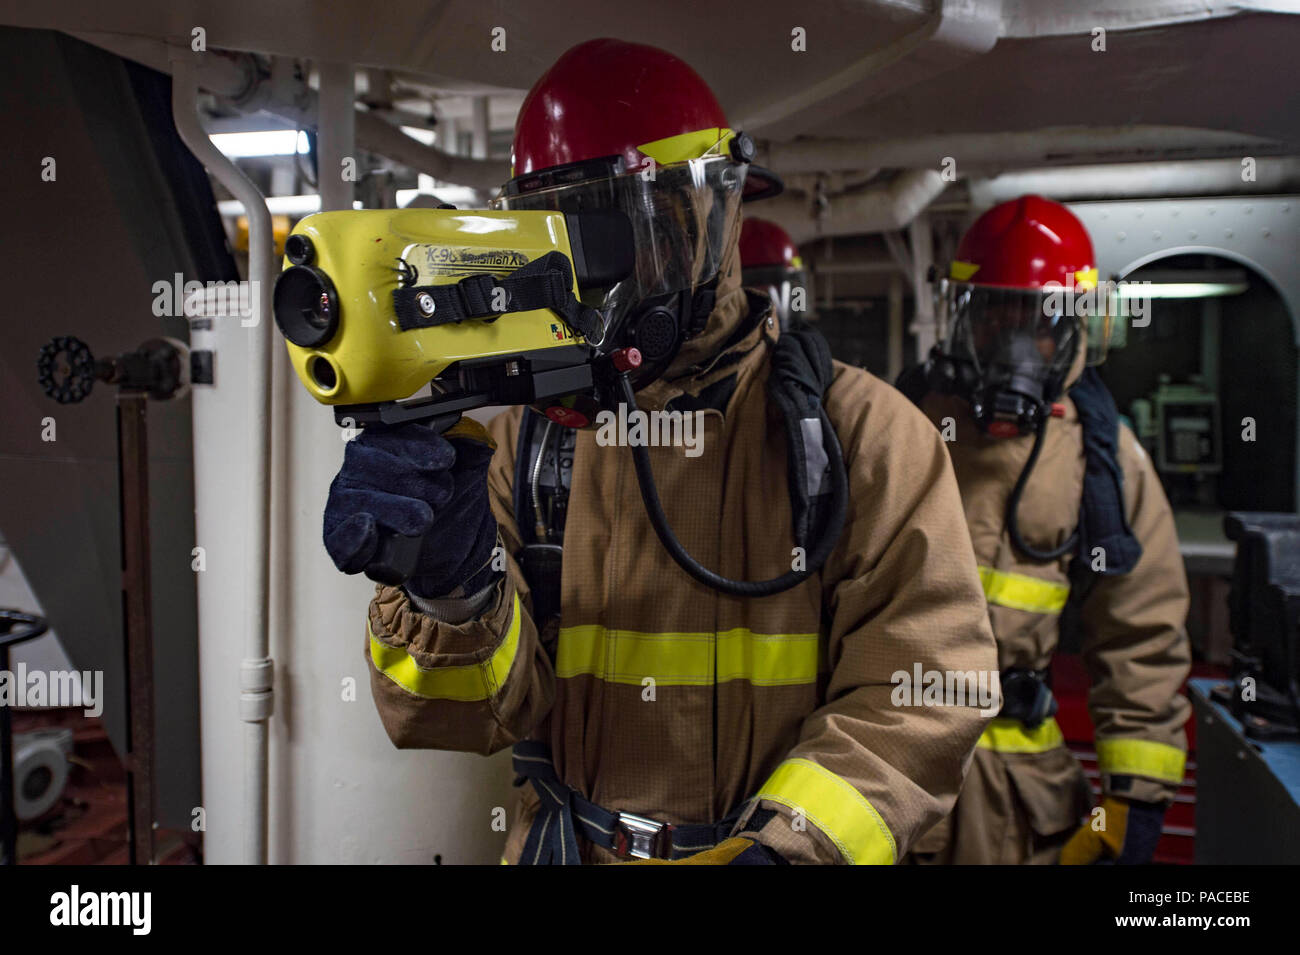 160311-N-MD297-132 PACIFIC OCEAN (March 11, 2016) - Damage Controlman Fireman Donte McNeil uses a Naval Firefighting Thermal Imager (NFTI) during a main space fire drill aboard the Arleigh Burke-class guided-missile destroyer USS Lassen (DDG 82). Lassen is deployed to the U.S. 4th Fleet area of responsibility supporting law enforcement operations as part of Operation Martillo. (U.S. Navy photo by Mass Communication Specialist 2nd Class Huey D. Younger Jr./Released) Stock Photo